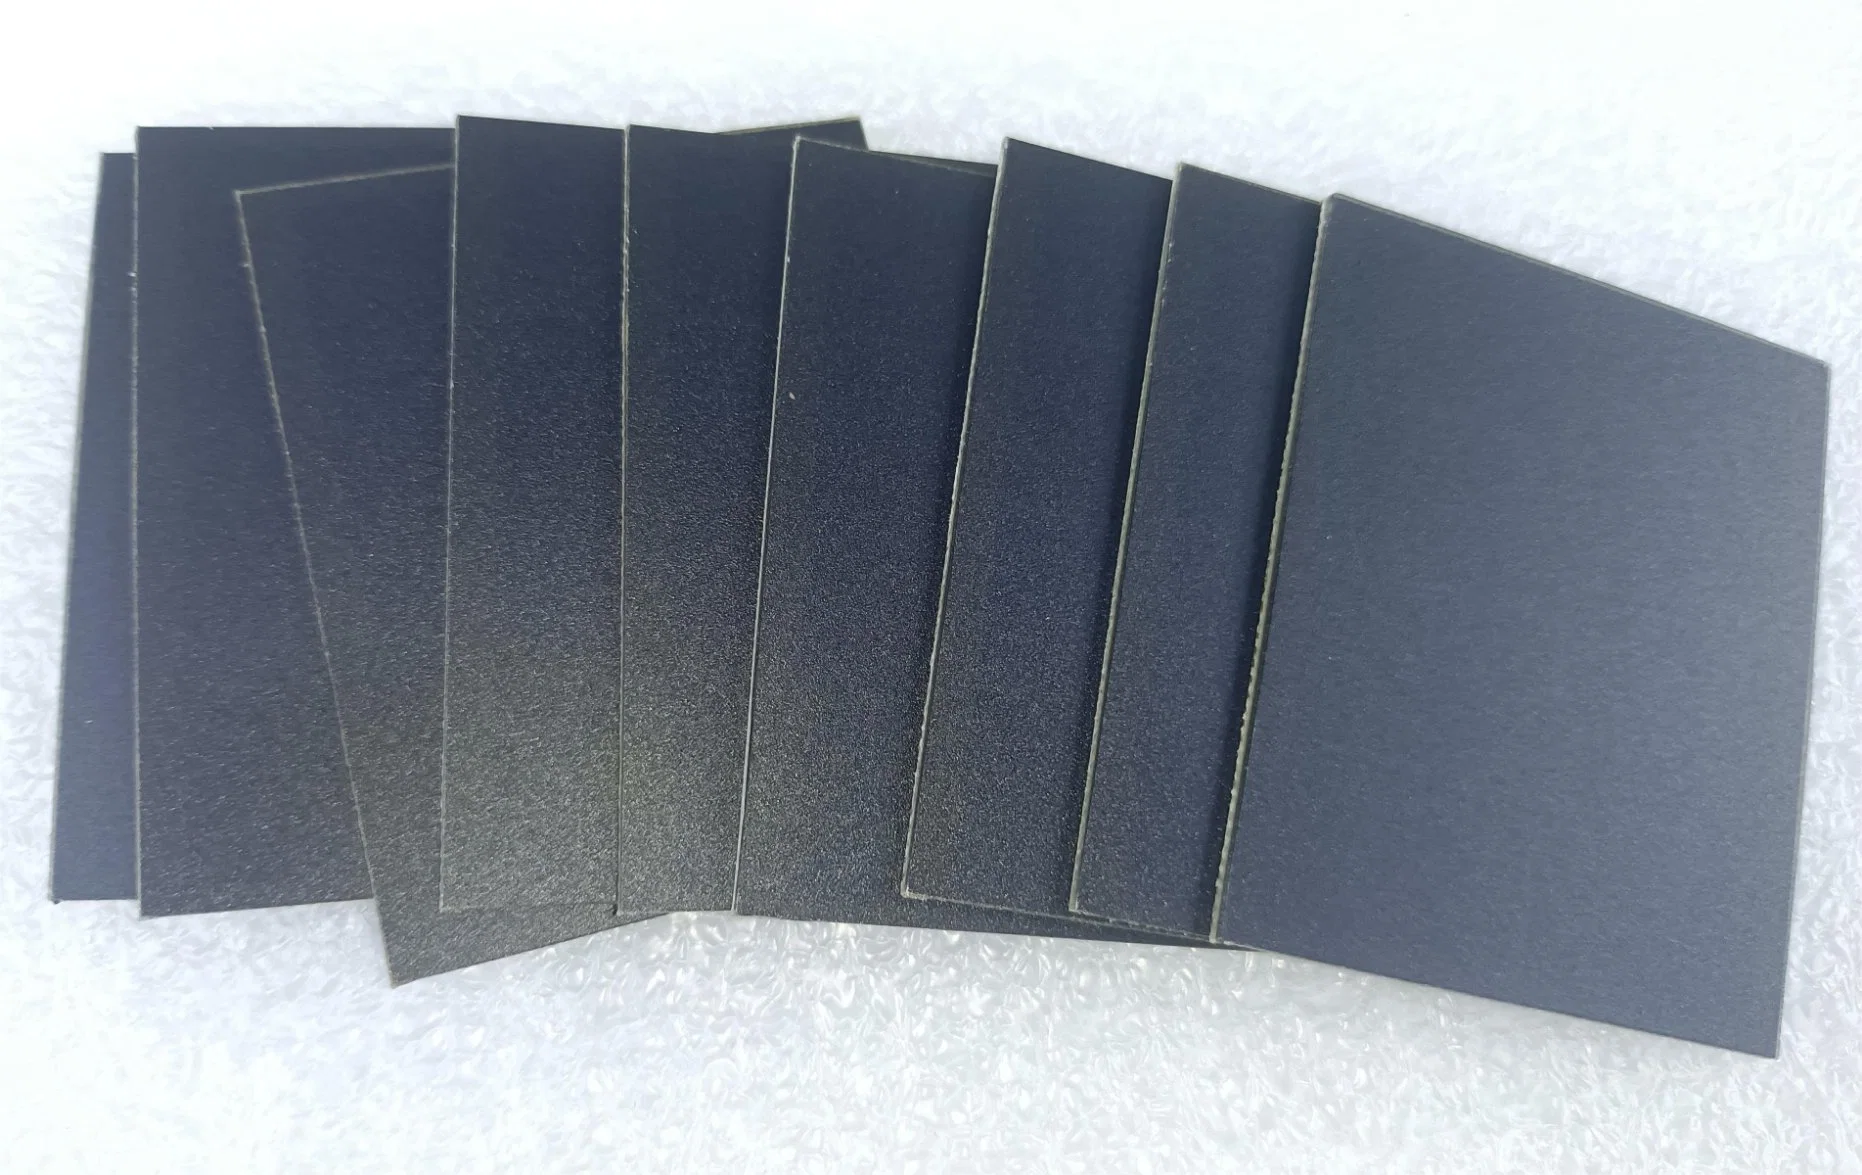 Mini Thin Film ETFE, Frosting, Glass Surface Mono PV Powered Module 1-12W 2-12V Custom Shapes Small Solar Panel - High Efficiency Mono Silicon Photovoltaic Cell